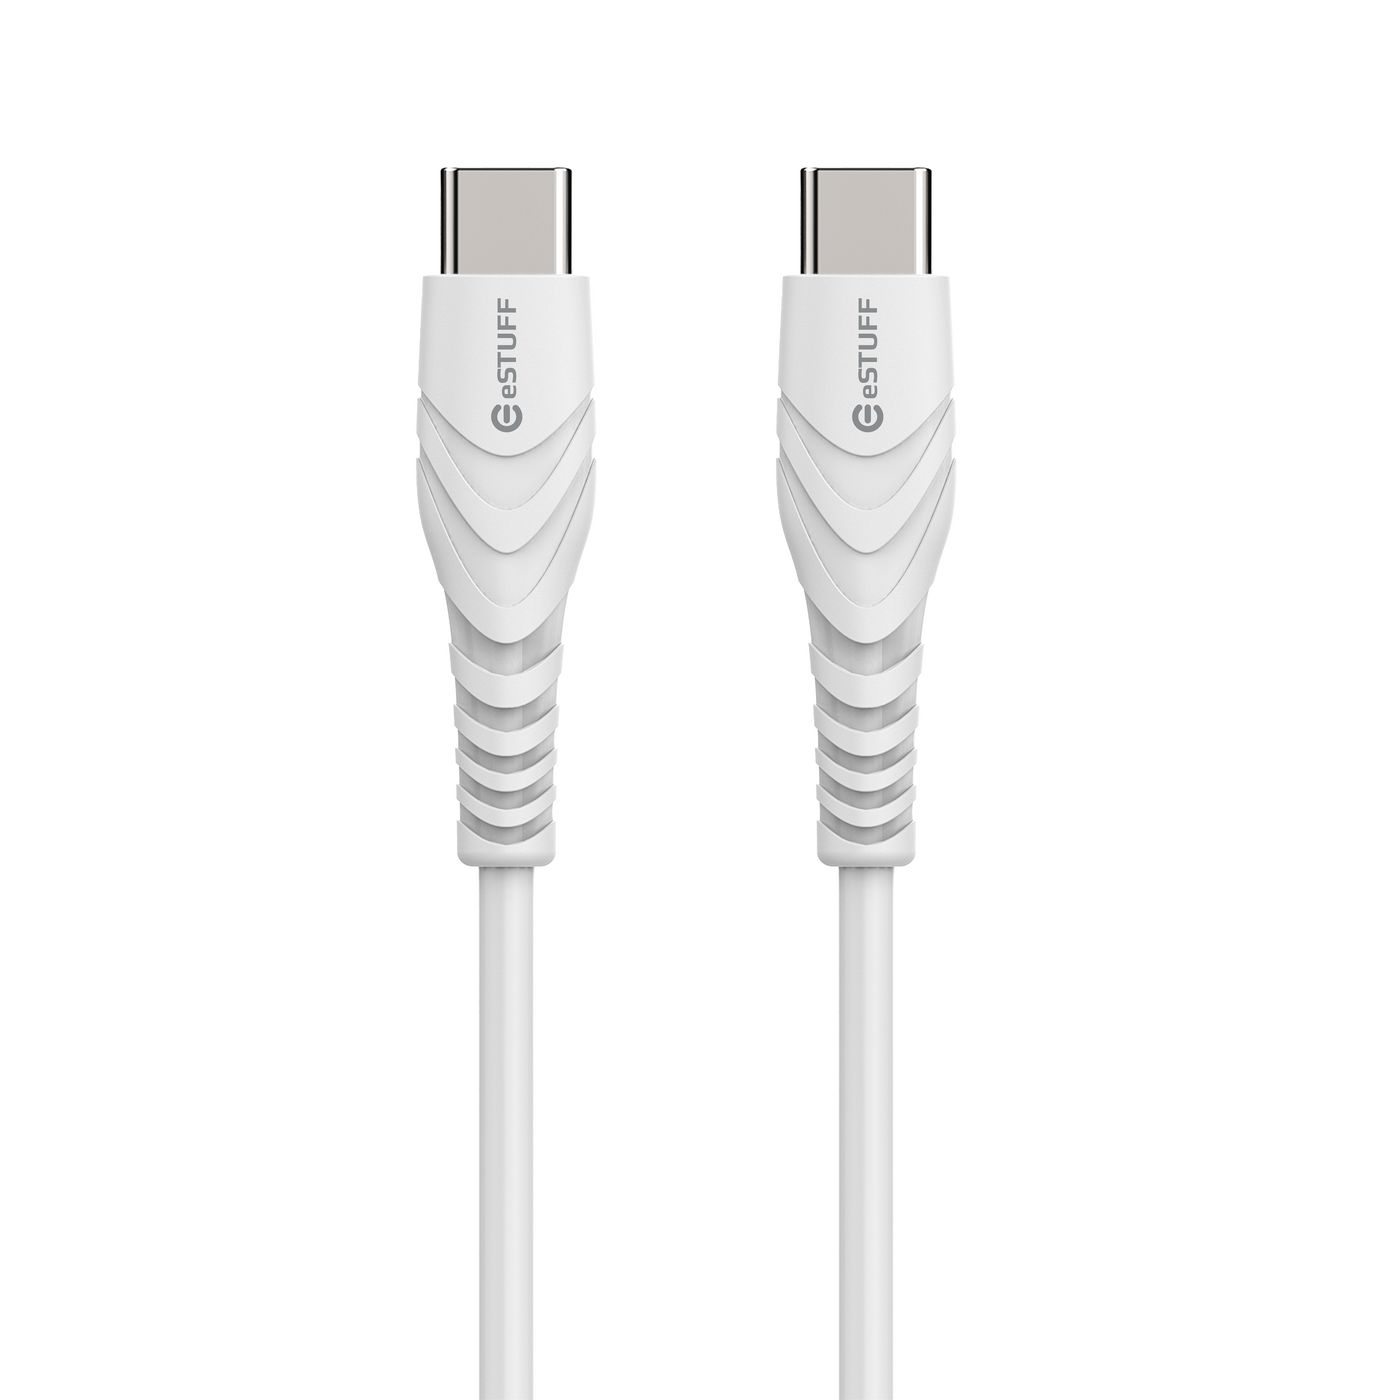 ESTUFF - USB-Kabel - USB-C (M) zu USB-C (M) - USB2.0 2,4 A - 1,0m - USB Power Delivery (60W), unters